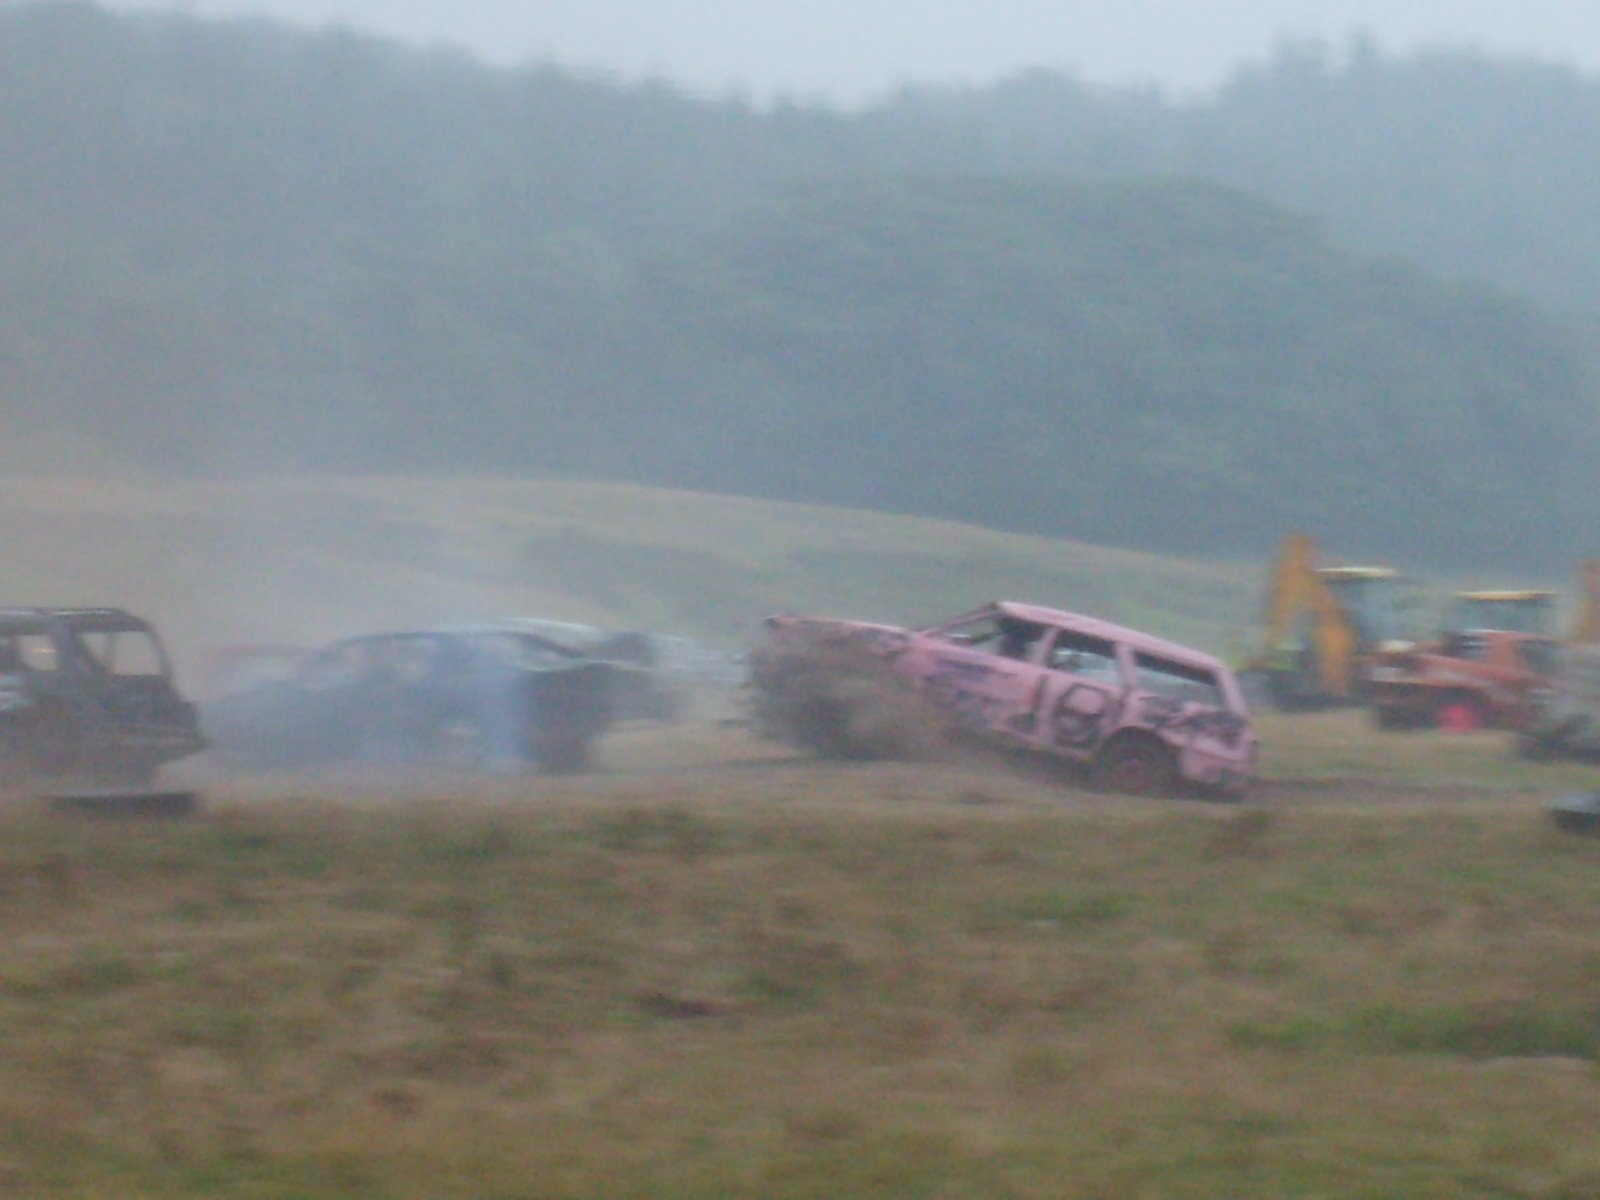 [brora+marquee+and+banger+racing+08+133.jpg]